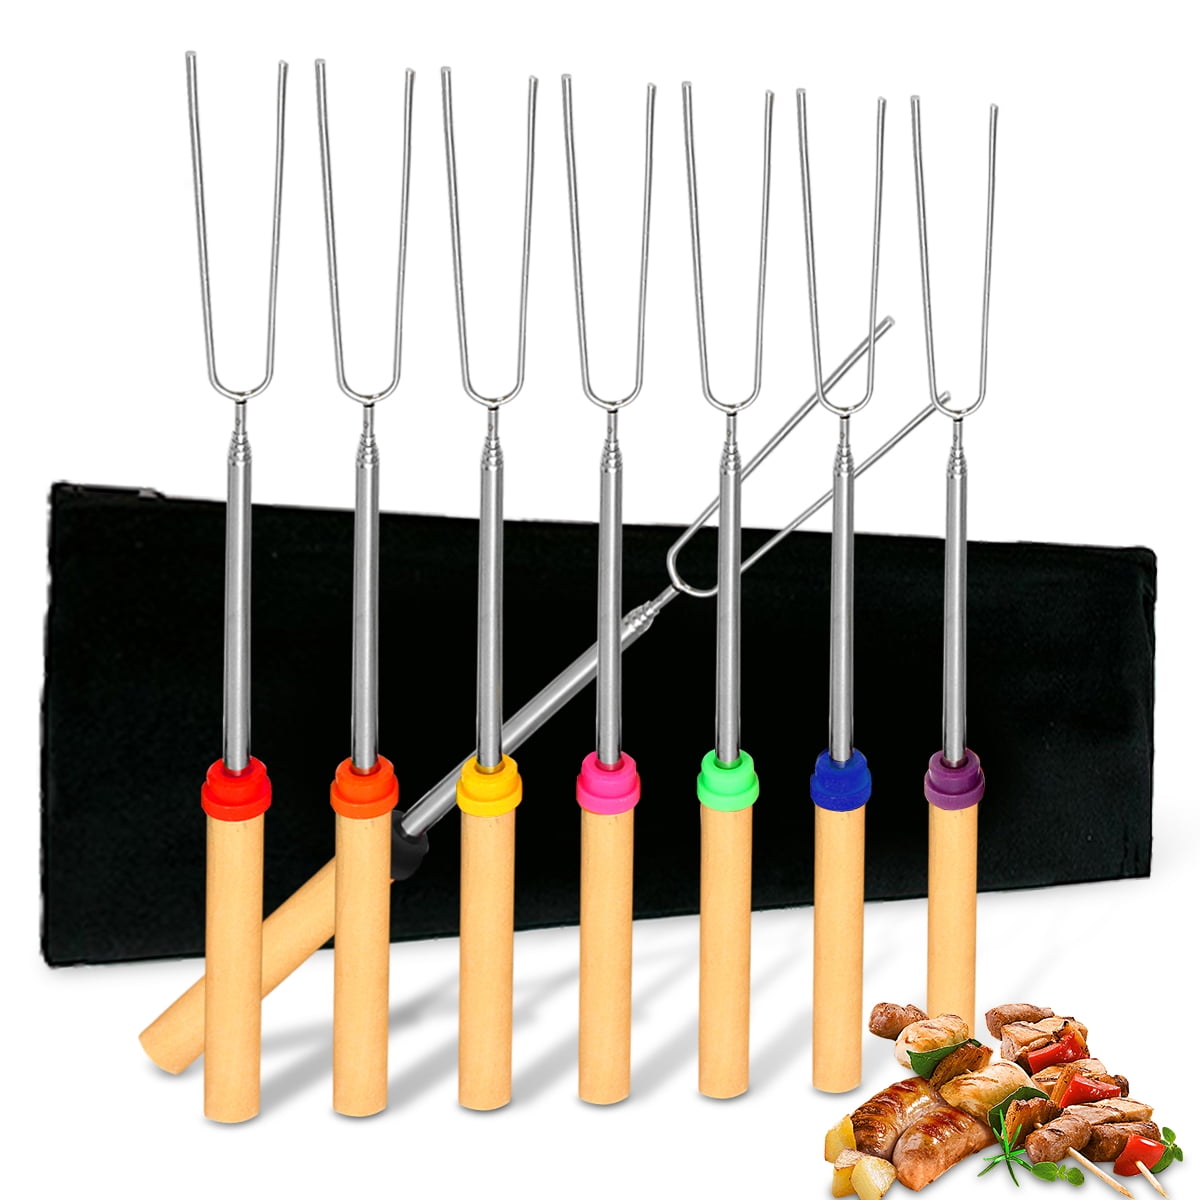 BBQ Campfire - Telescopic Extendable Forks 45 cm Extra Long Set of 12 Smores and Hot Dog Skewers Camping and Hiking Accessories Fire Pit Marshmellow Roasting Sticks 